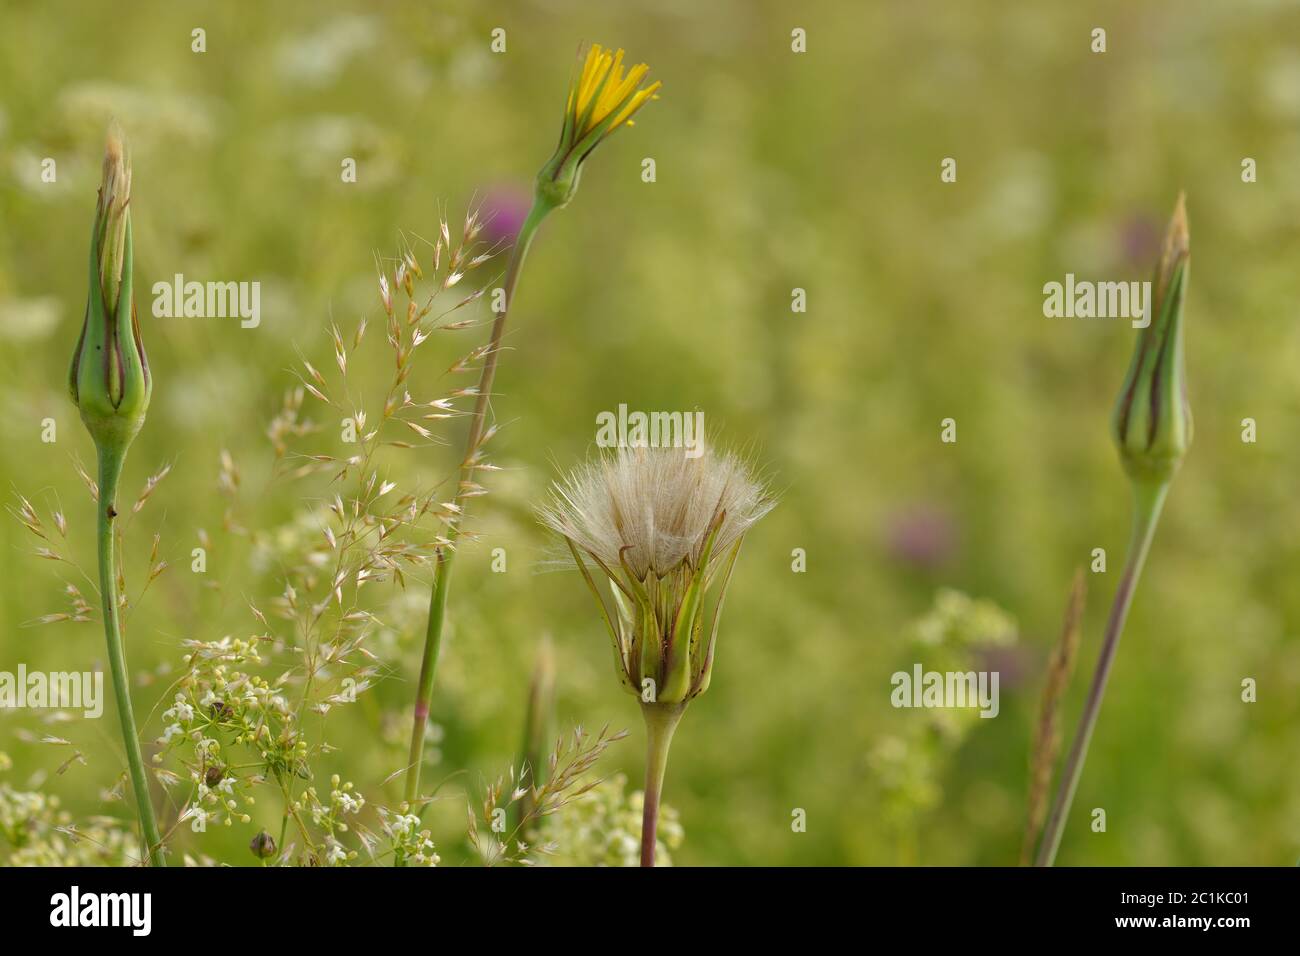 Tragopogon pratensis (common names Jack-go-to-bed-at-noon ) Stock Photo